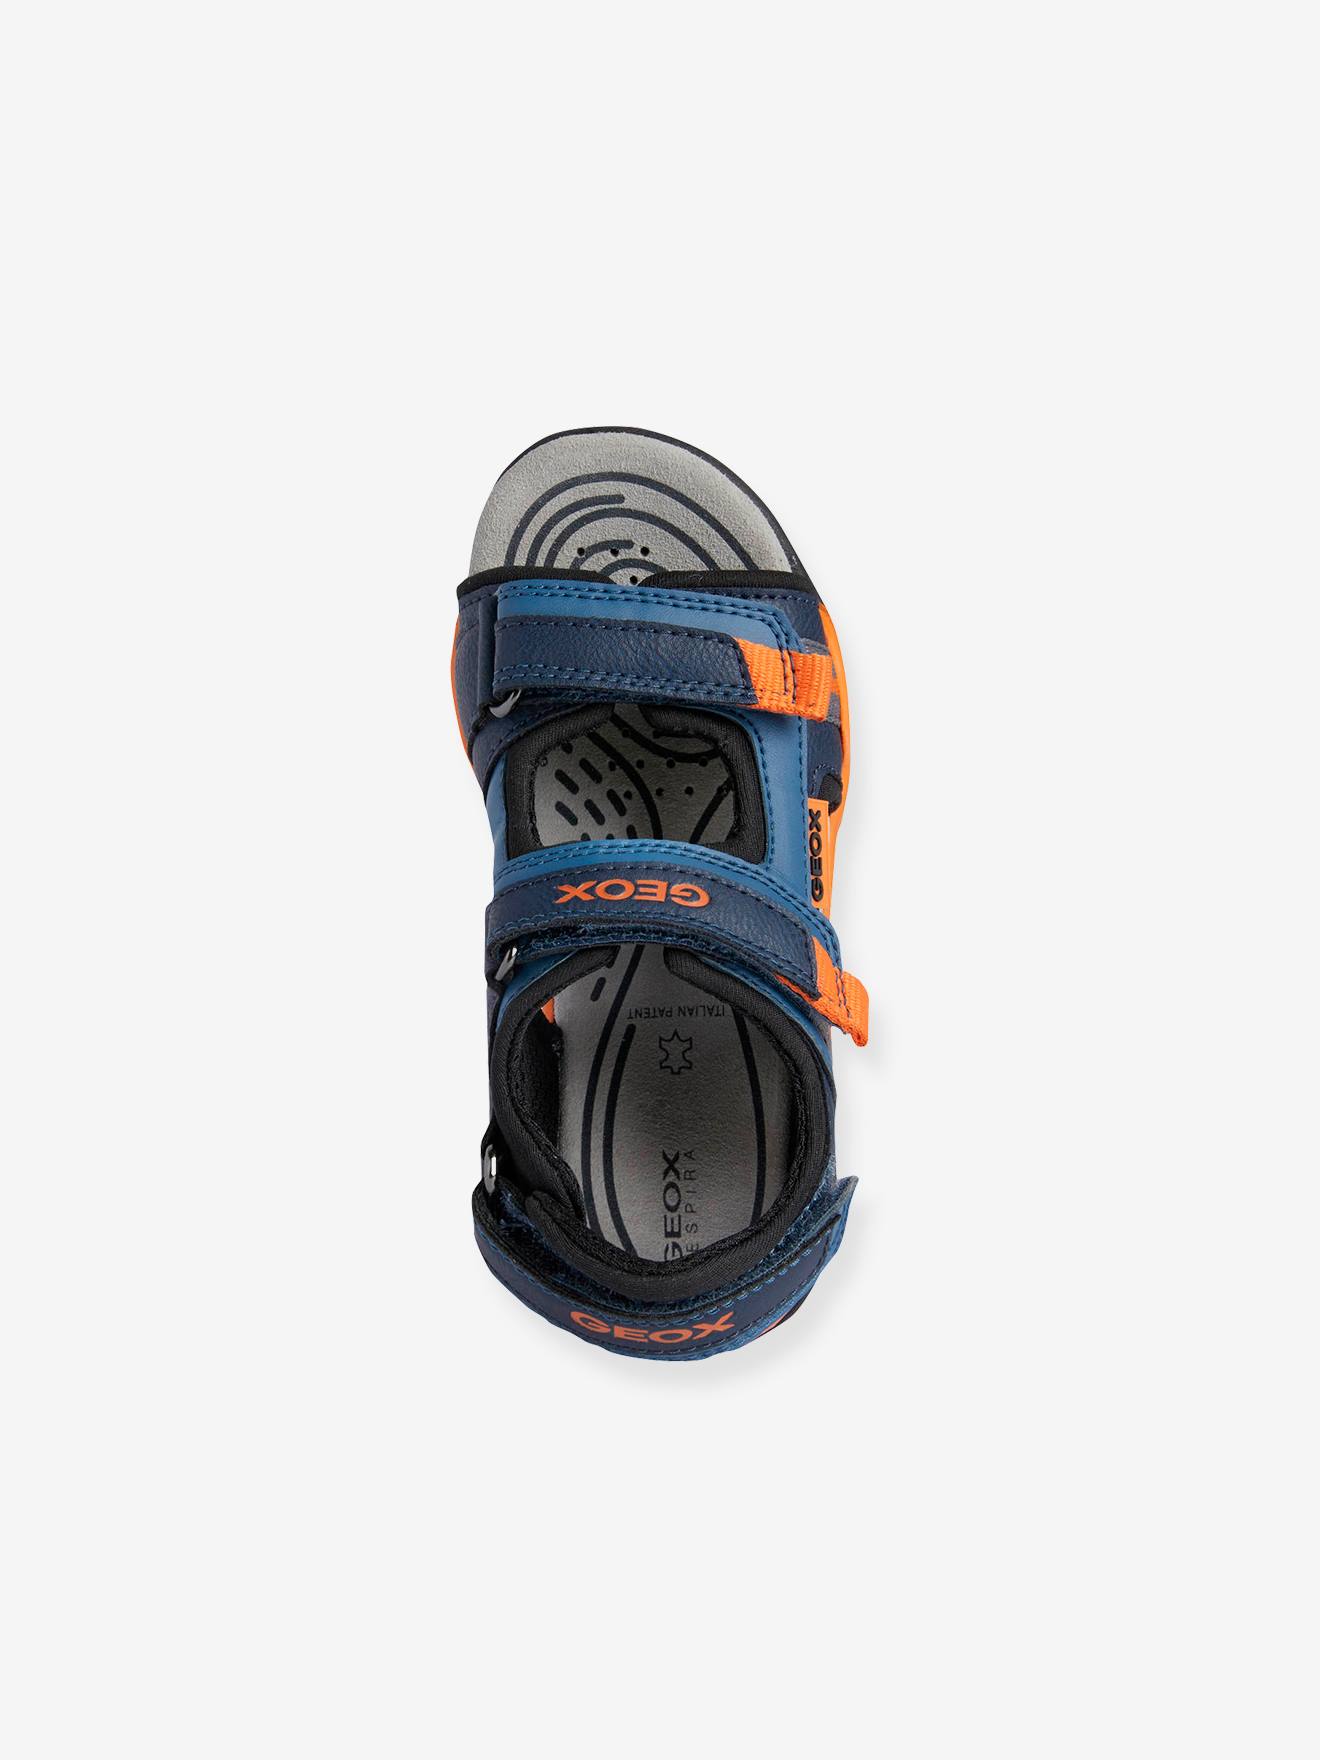 Sandals for Boys, J. Borealis B.A by GEOX® - blue medium solid, Shoes